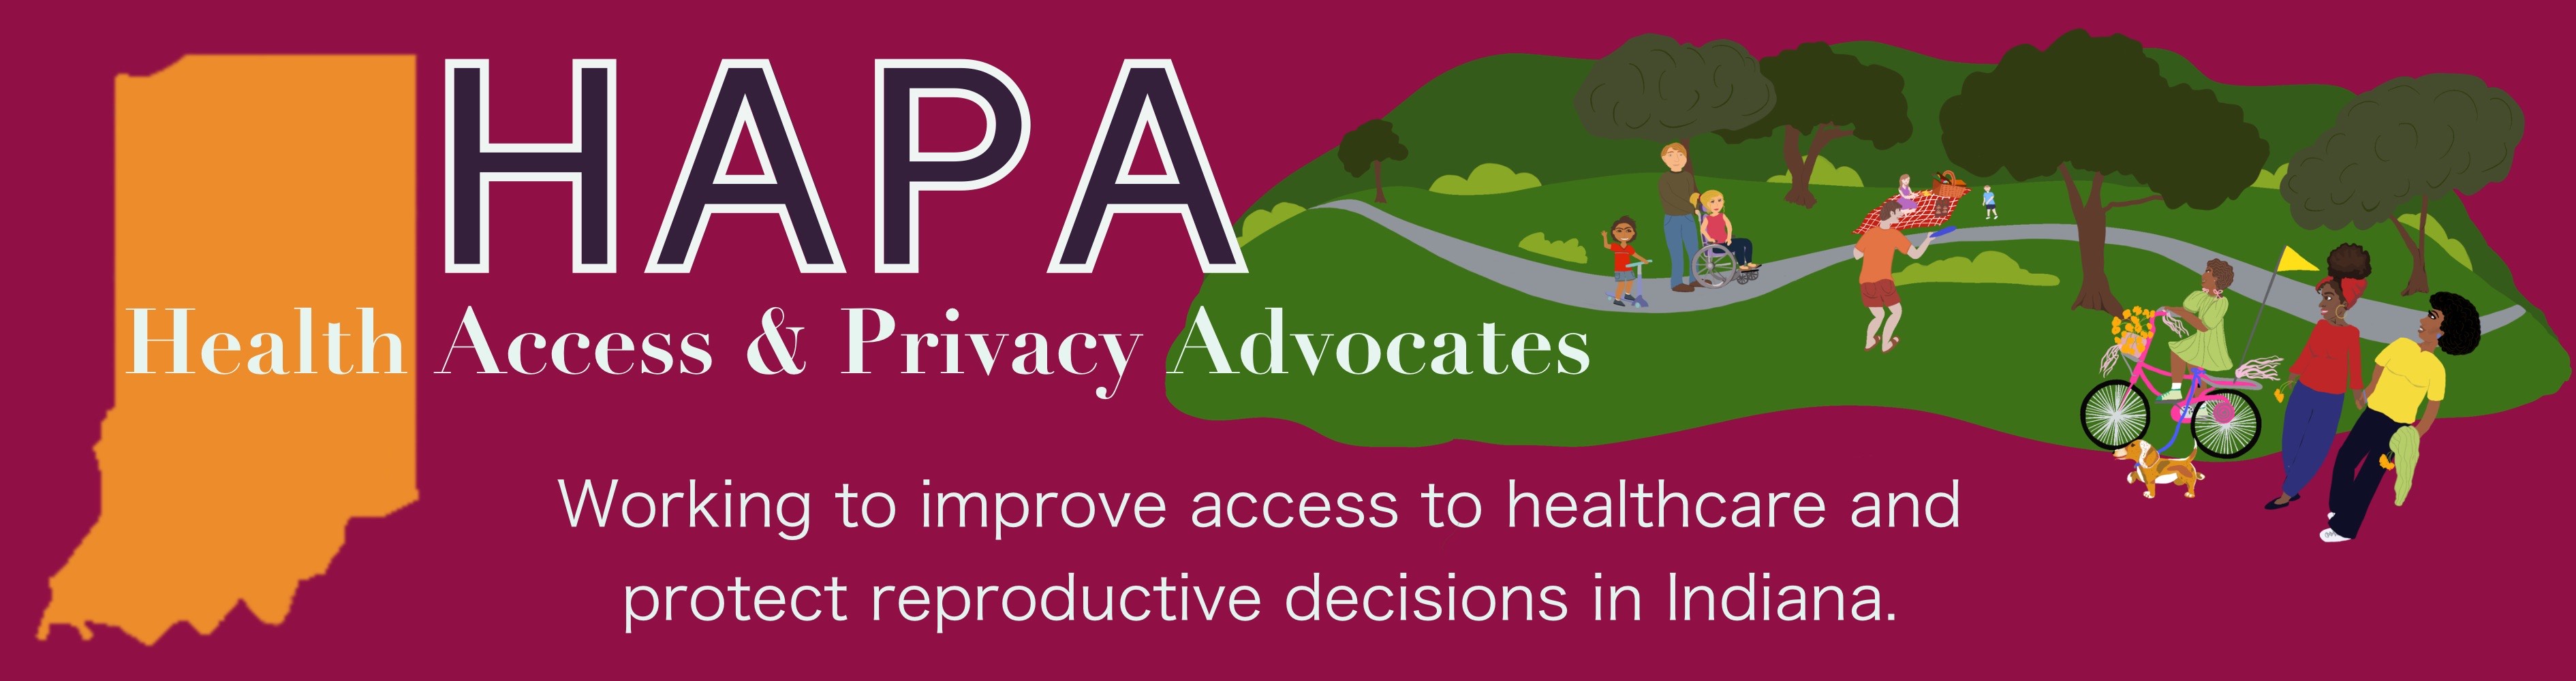 HAPA--Health Access & Privacy Alliance title with outline of state